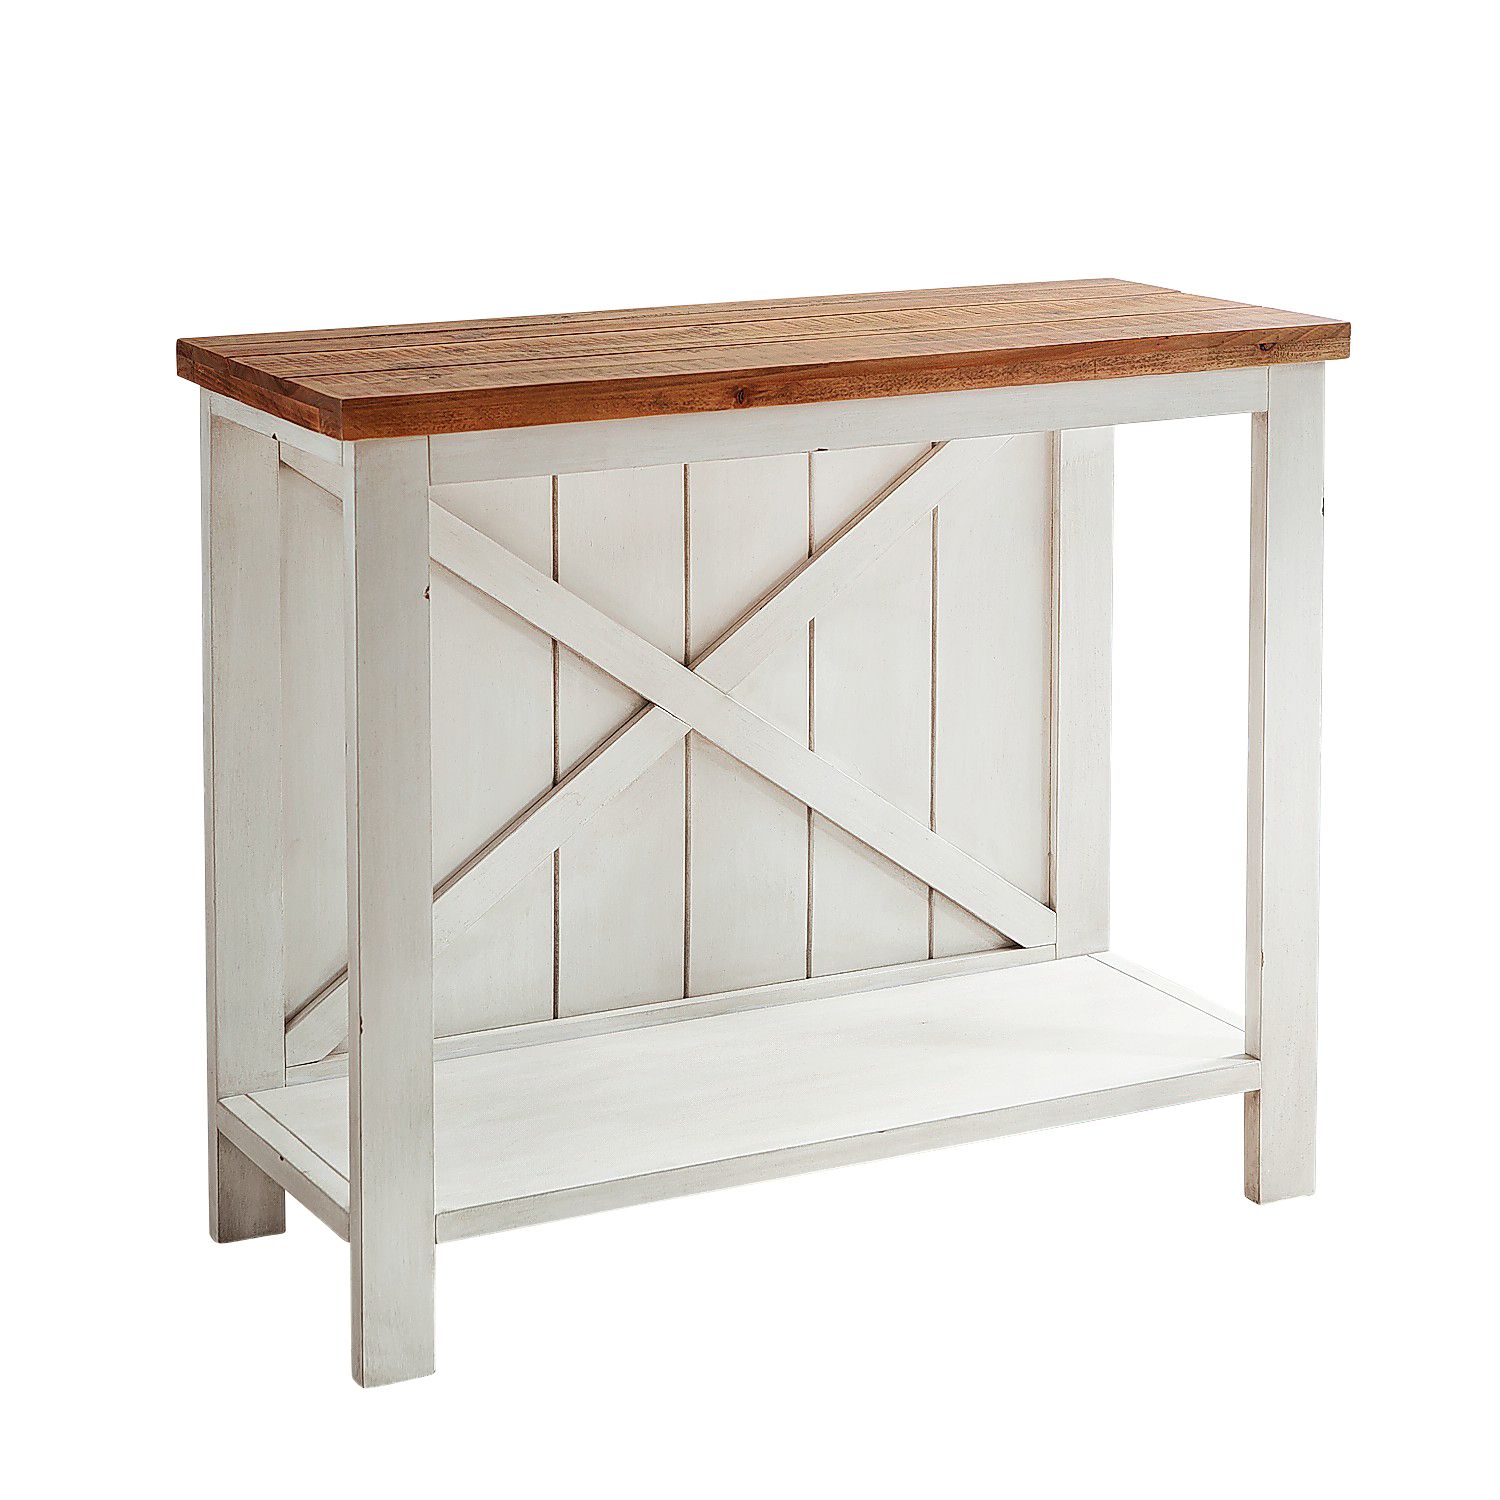 Farmhouse White Small Console Table – Pier1 Imports In Oceanside White Washed Console Tables (View 13 of 20)